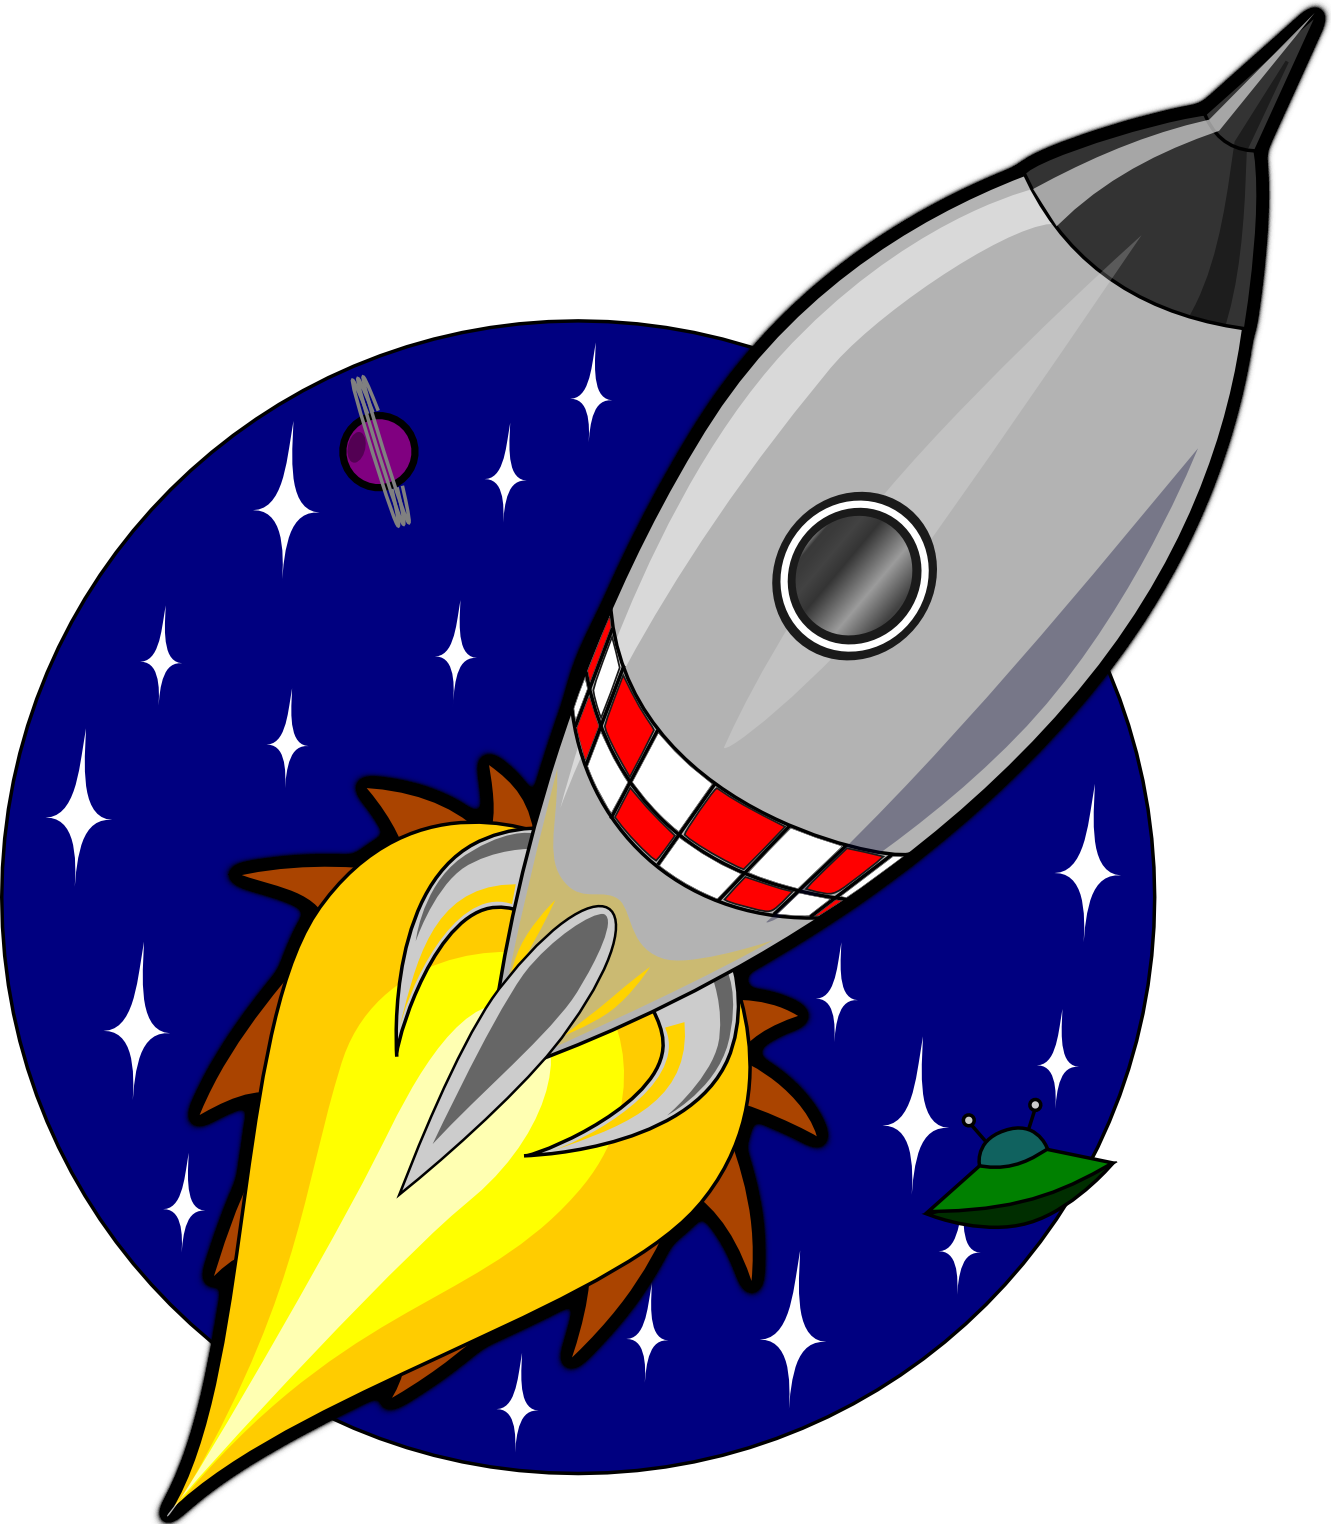 Cartoon Rocket Images - Clipart library